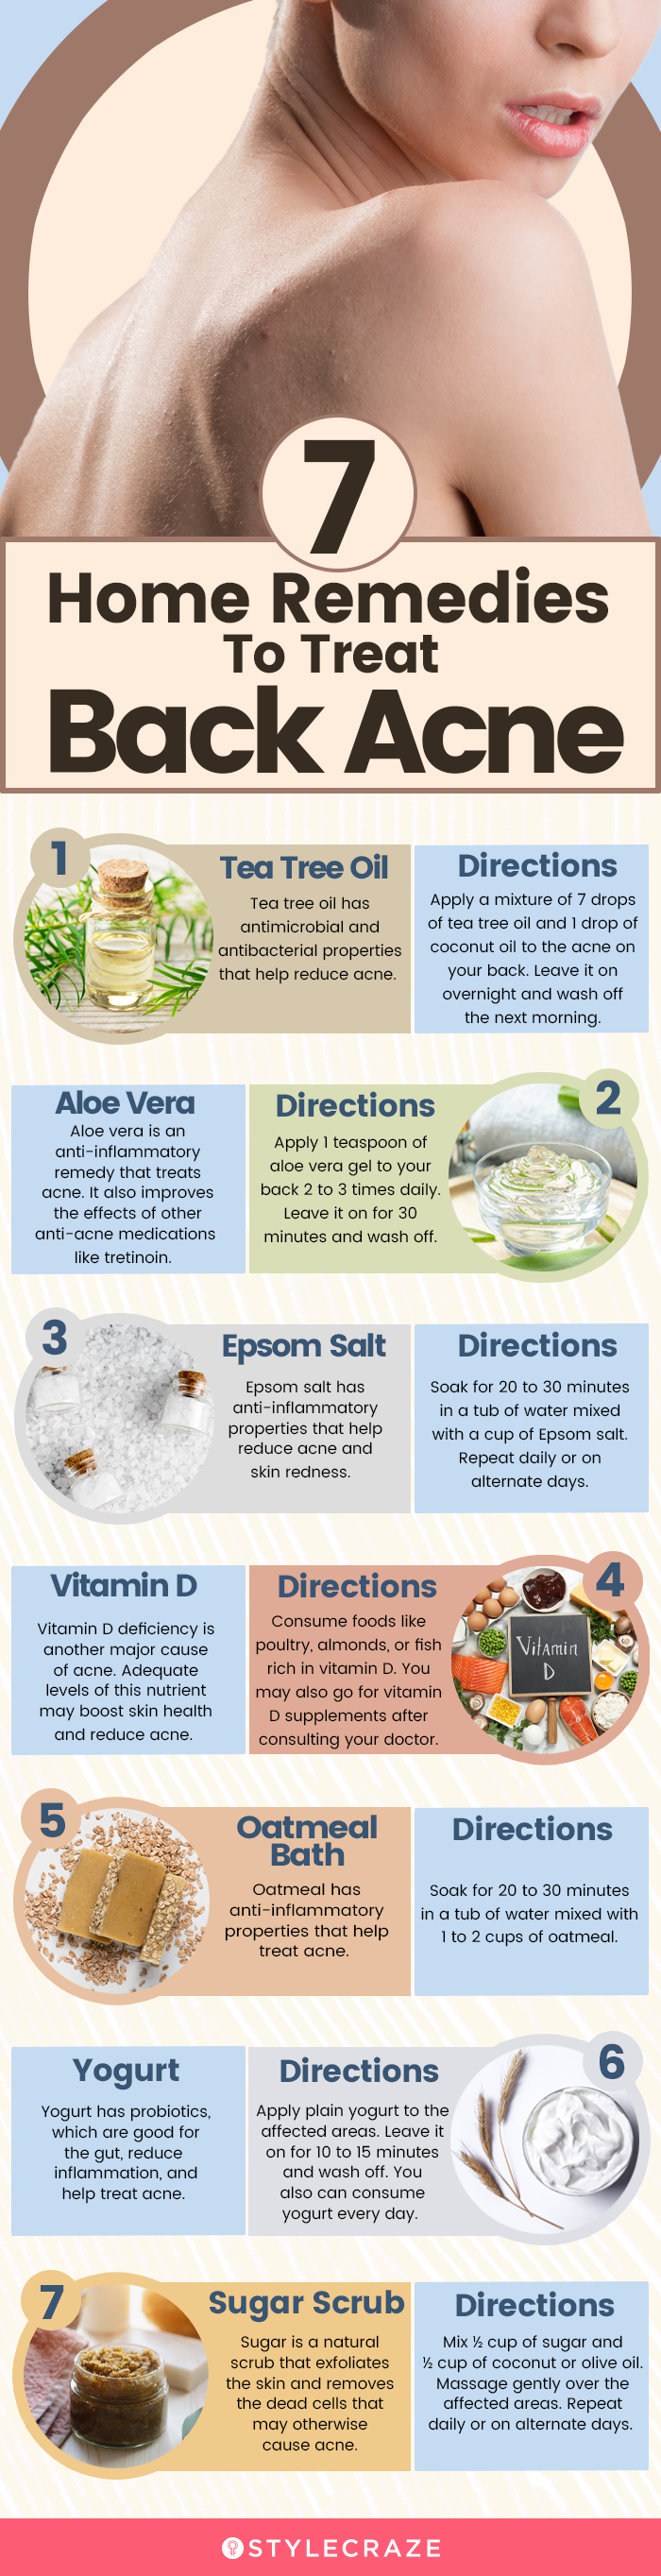 7 home remedies to treat back acne (infographic)